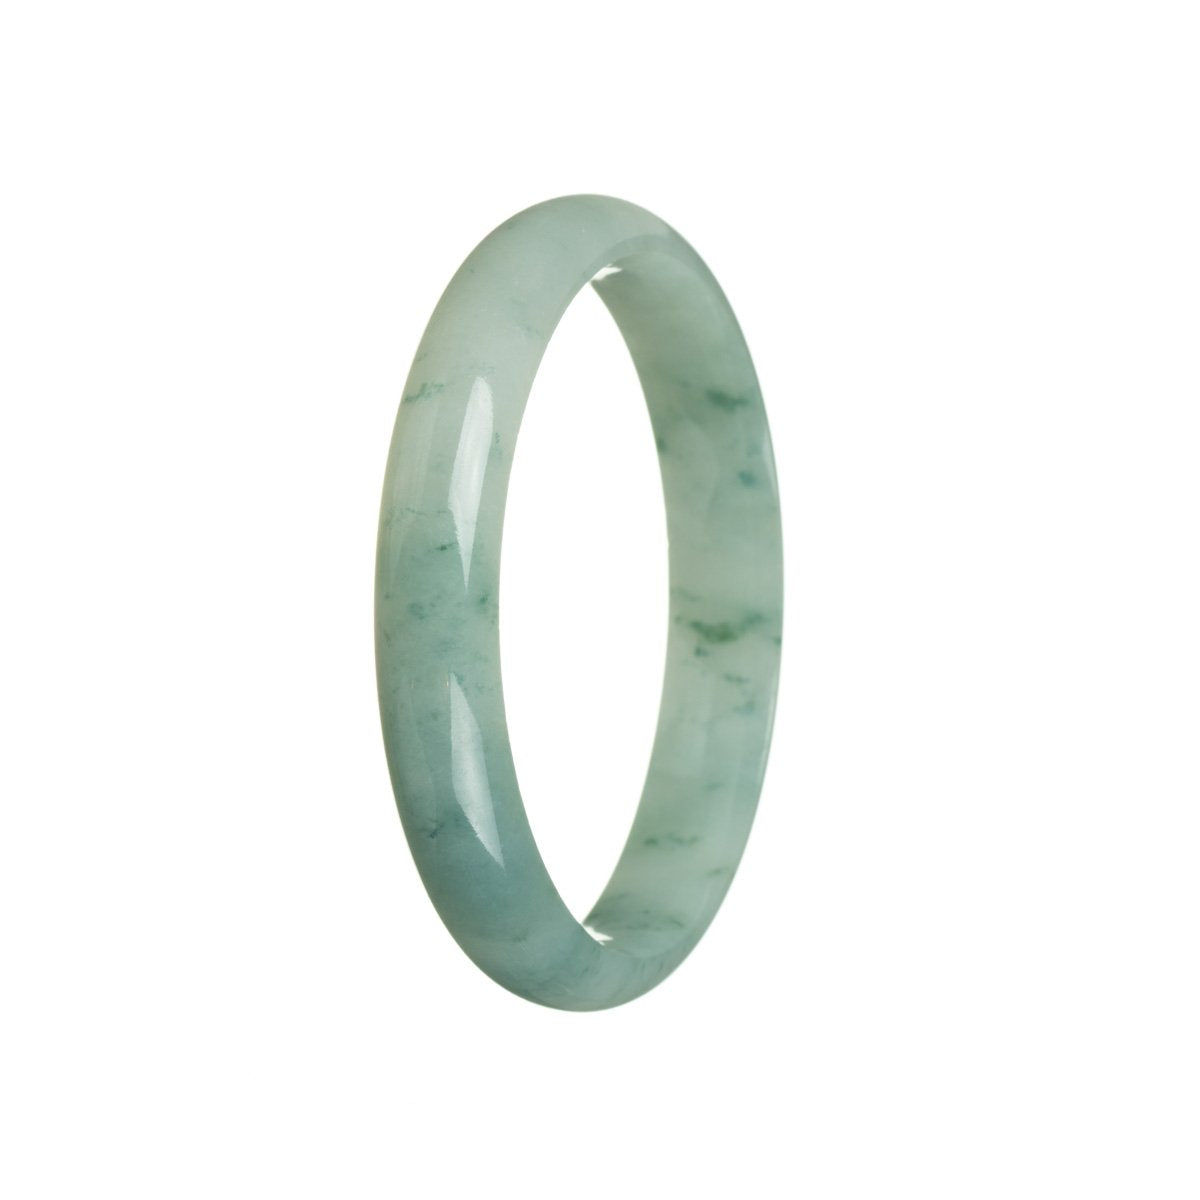 A half-moon-shaped bangle bracelet made of untreated green Burma Jade, certified for its authenticity.